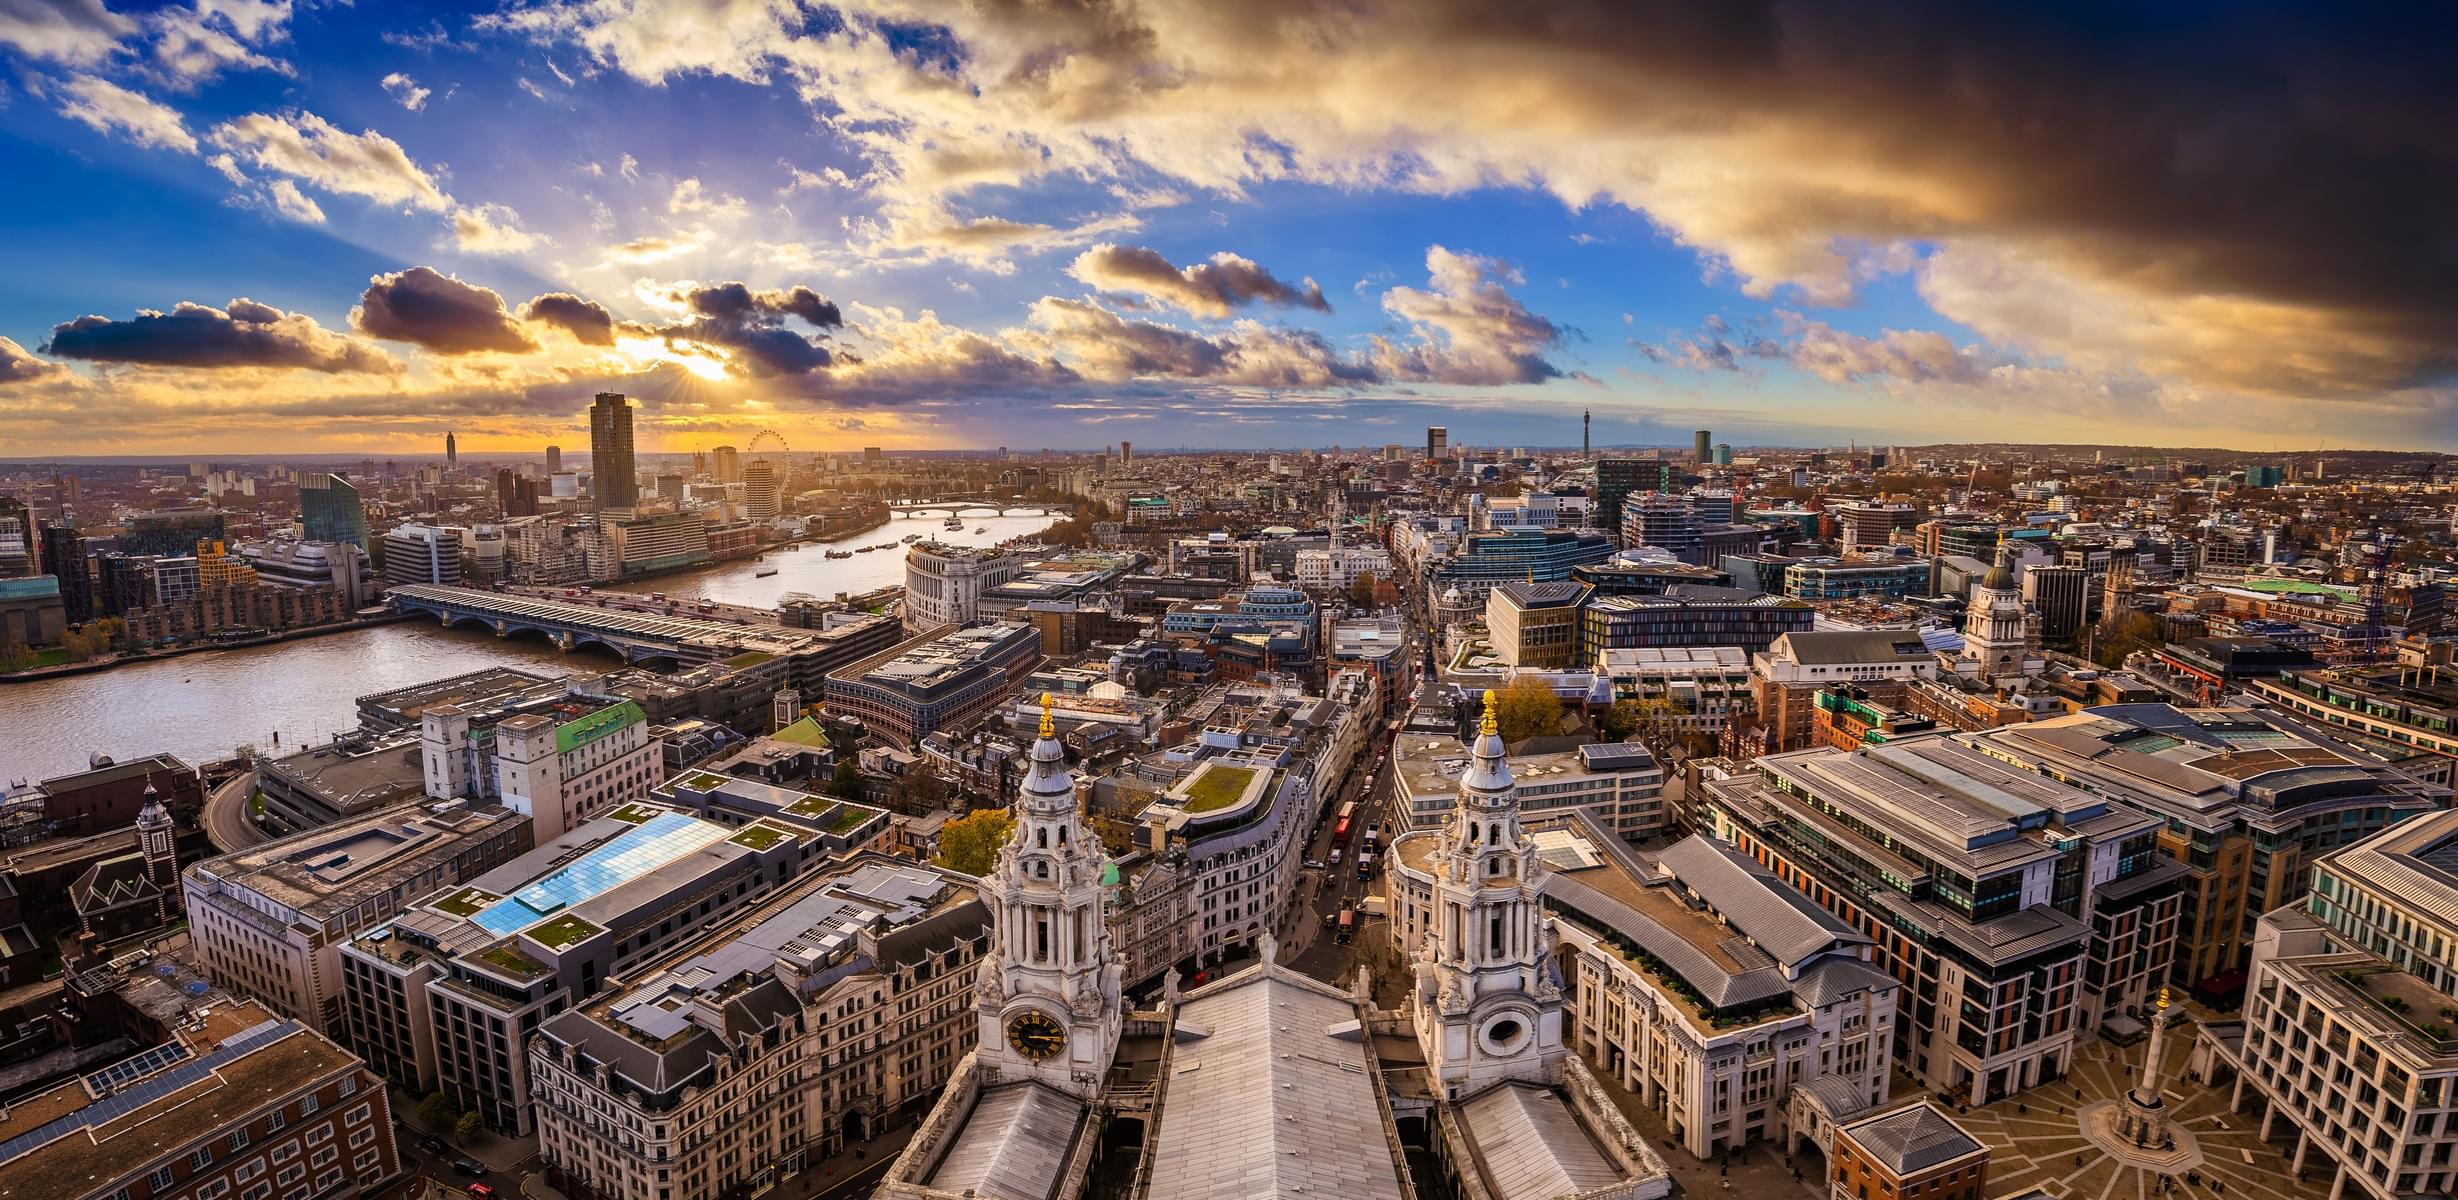 Know Before You Experience Helicopter Tours In London